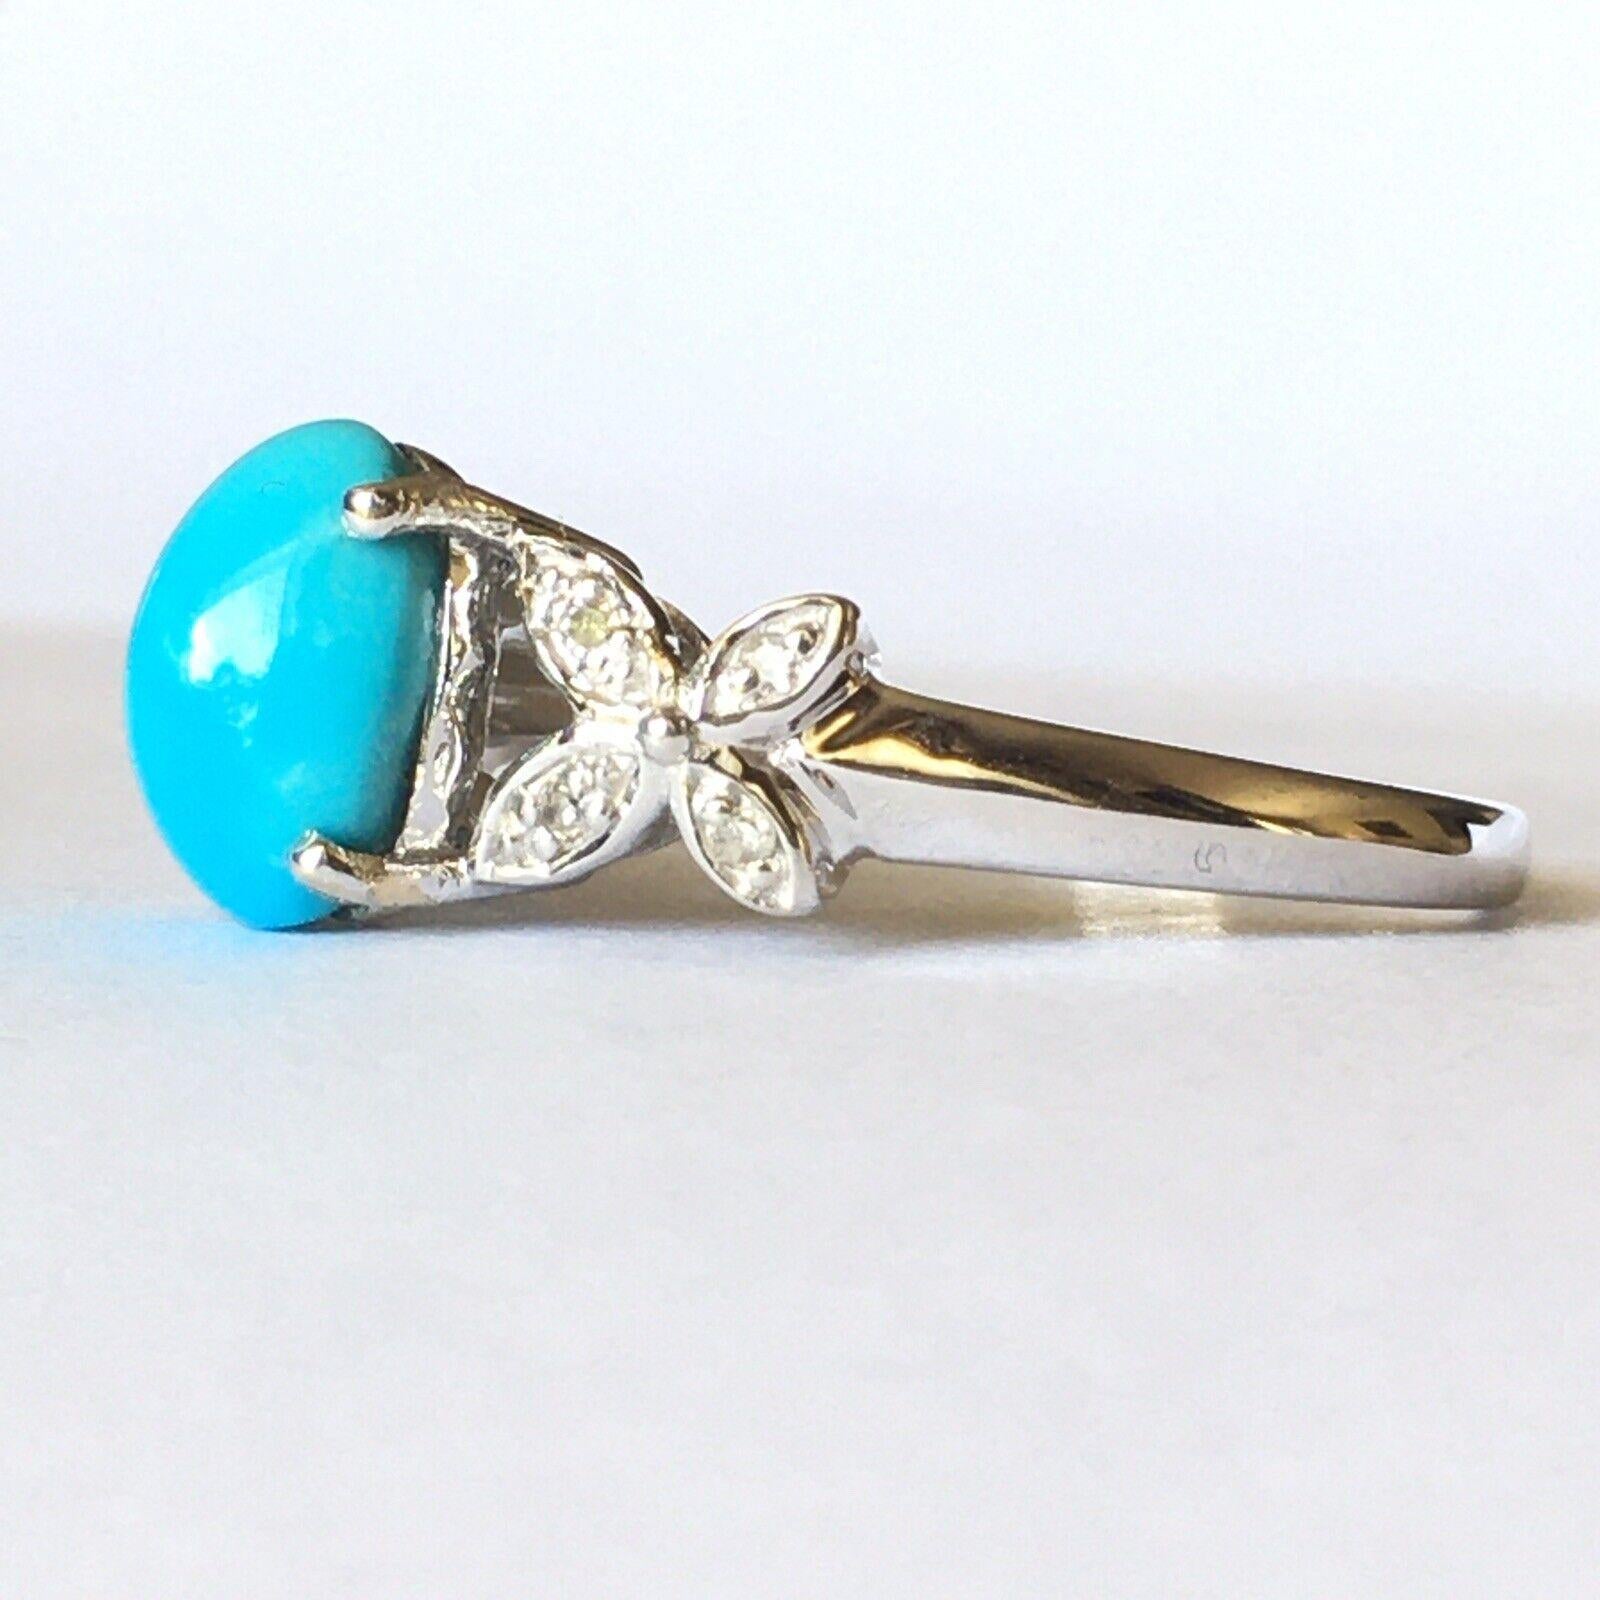 Modernist 14 Karat White Gold Hallmarked Lady's Diamond Persian Turquoise Ring 1970s Size For Sale